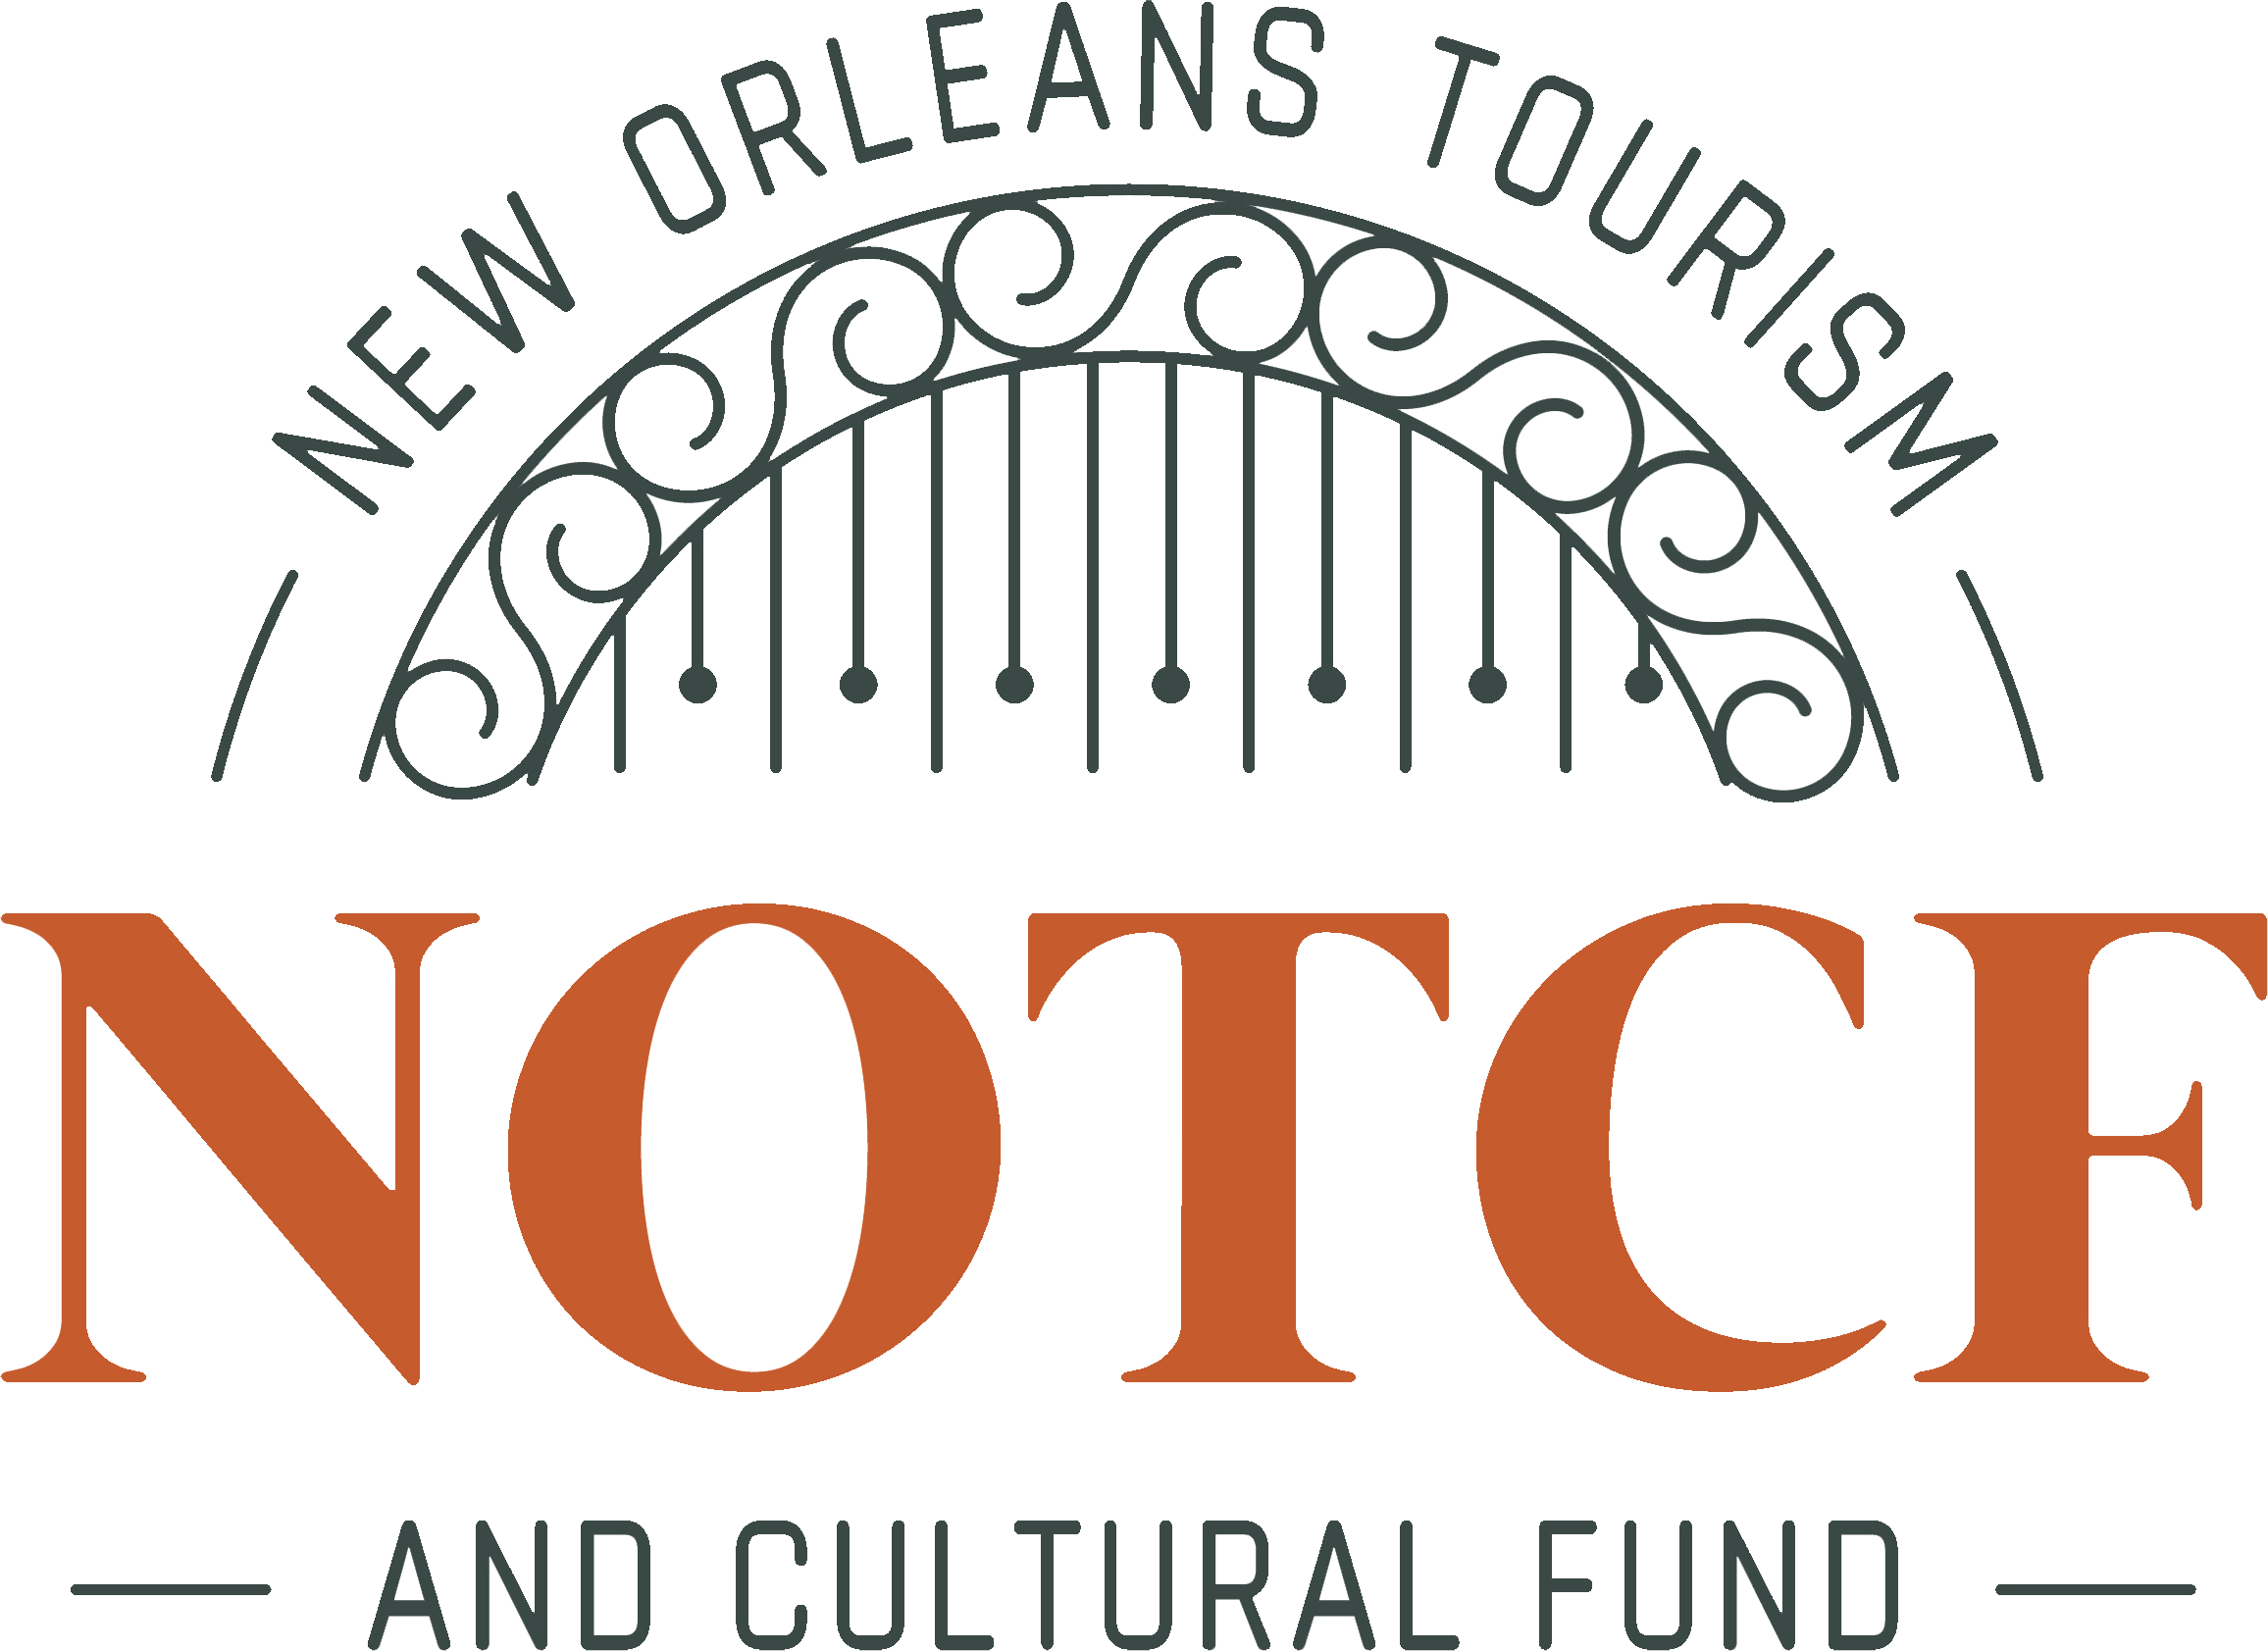 New Orleans Tourism & Culture Fund